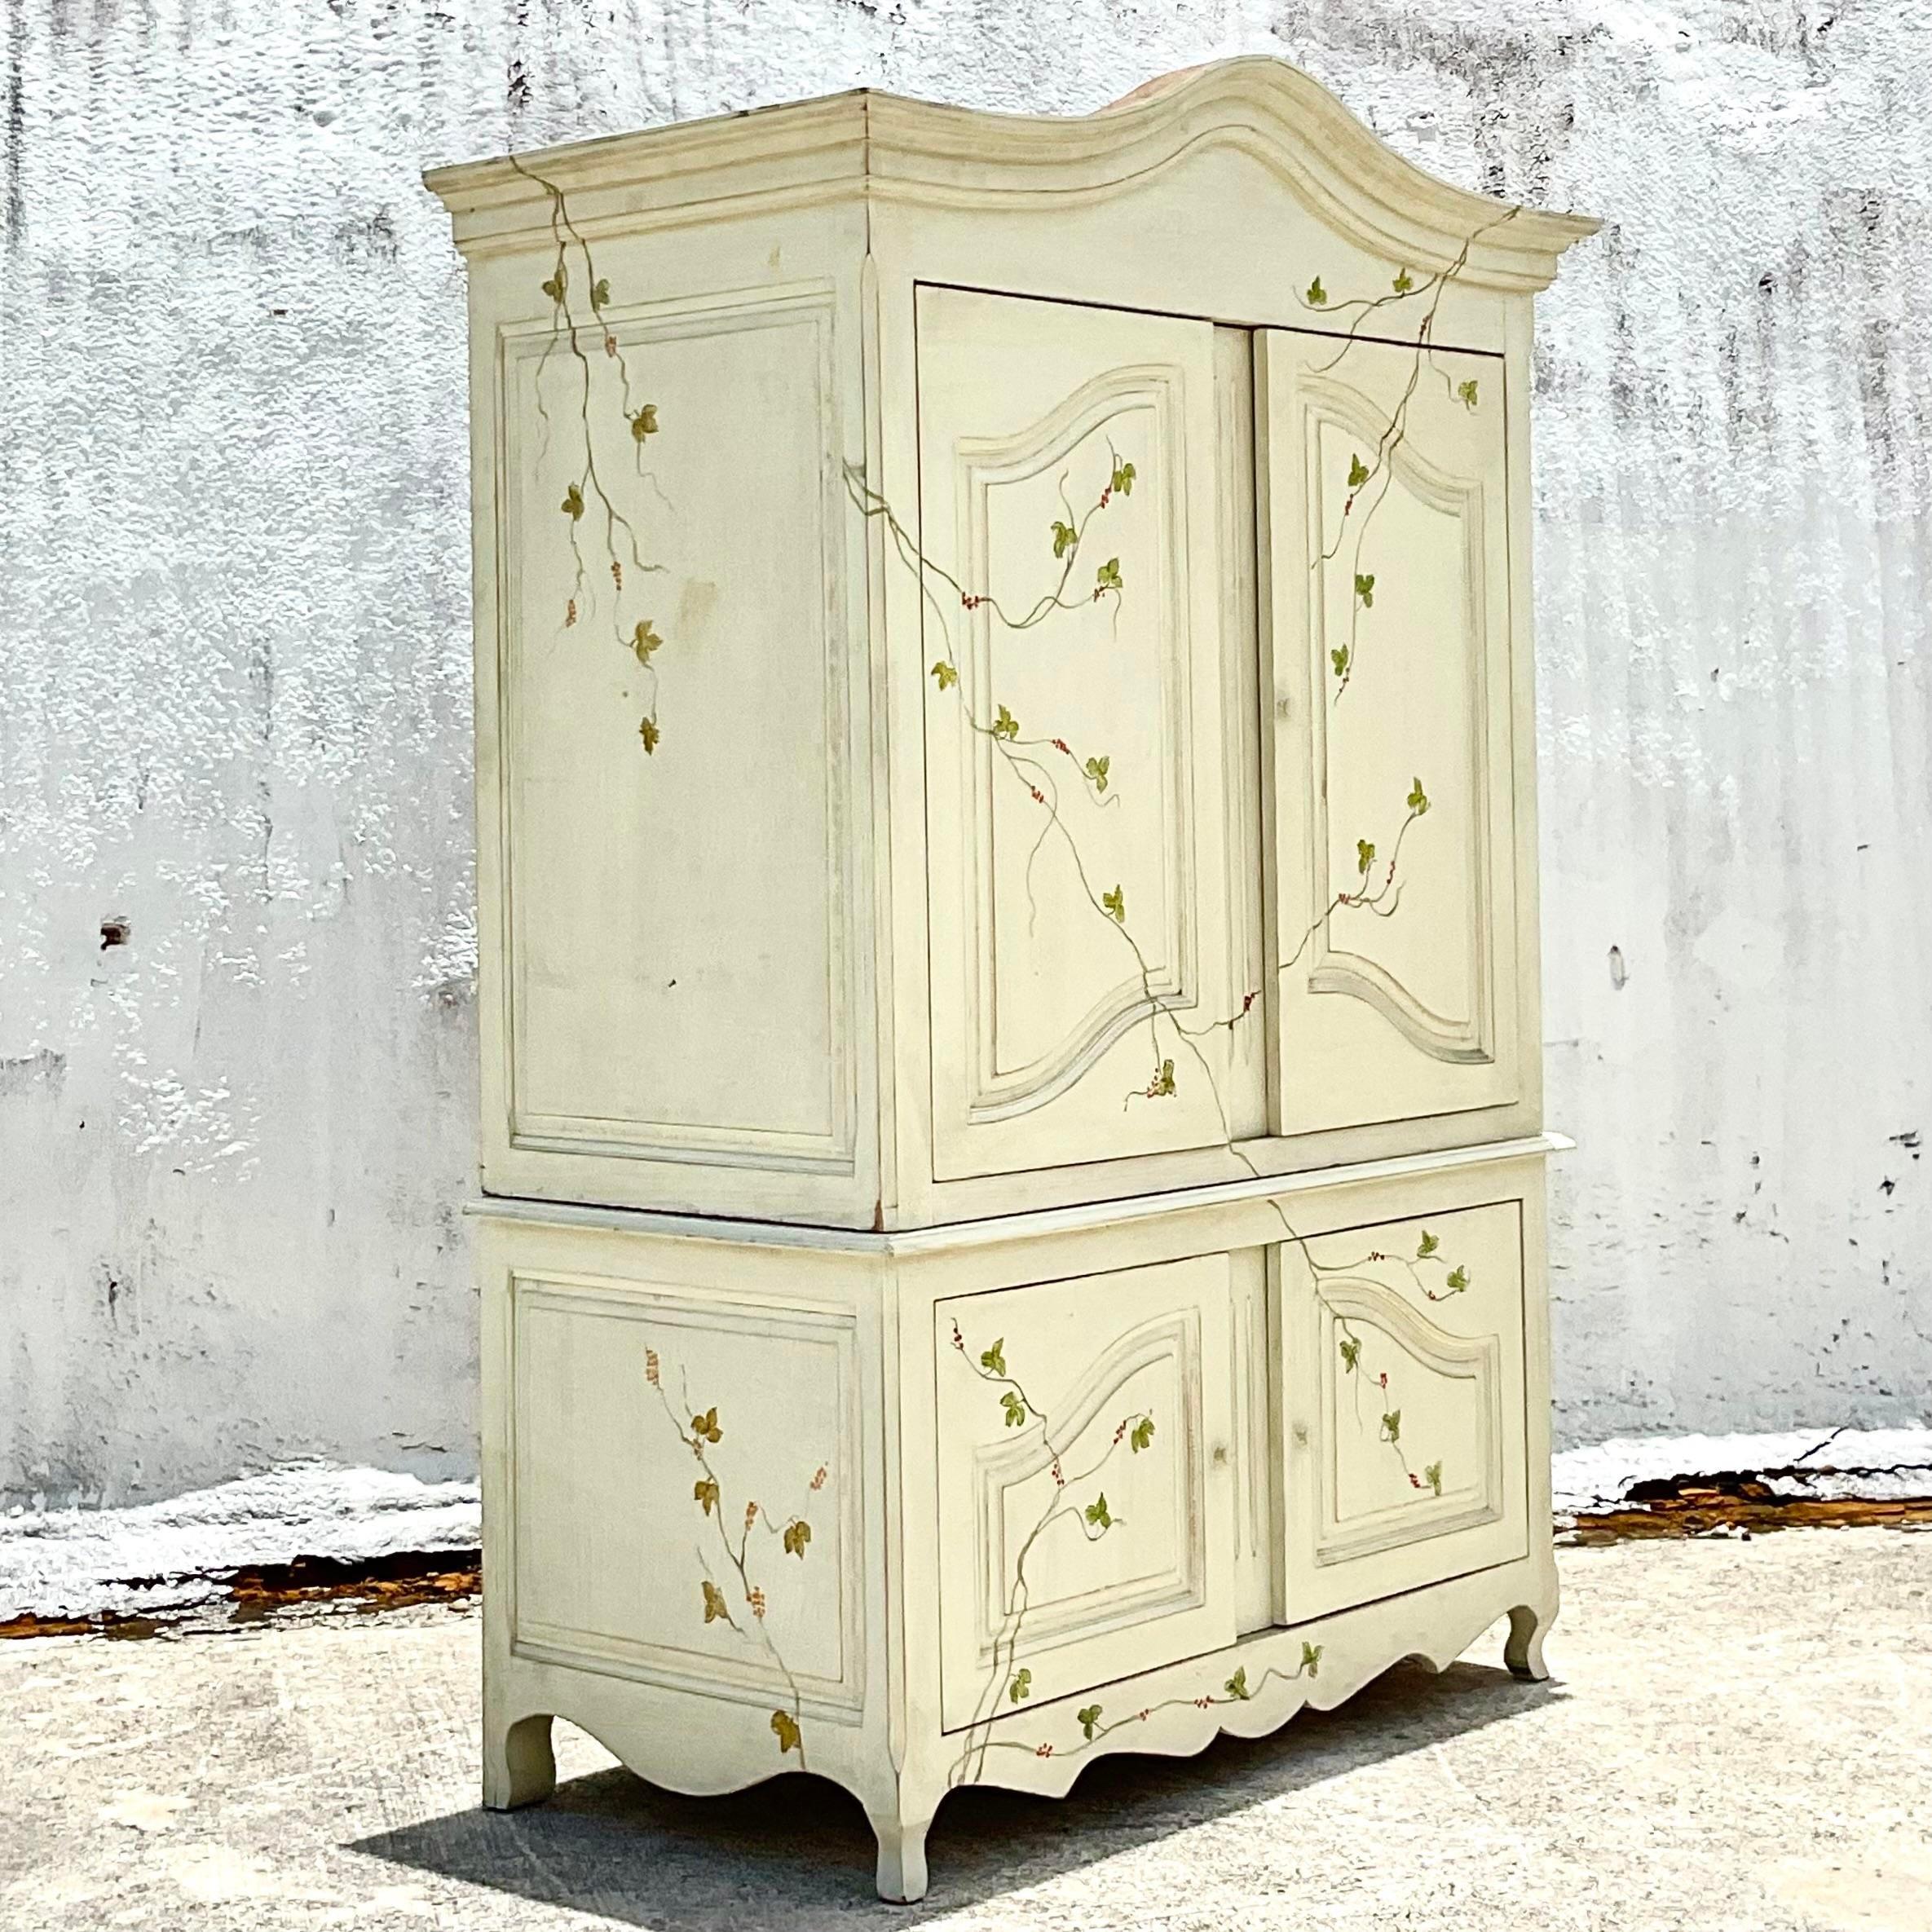 Fantastic vintage monumental armoire. A beautiful hand painted vine on a white background. Currently outfitted as a media cabinet, but would be beautiful converted to a dry bar or just add a hang bar for extra storage. Acquired from a Palm Beach